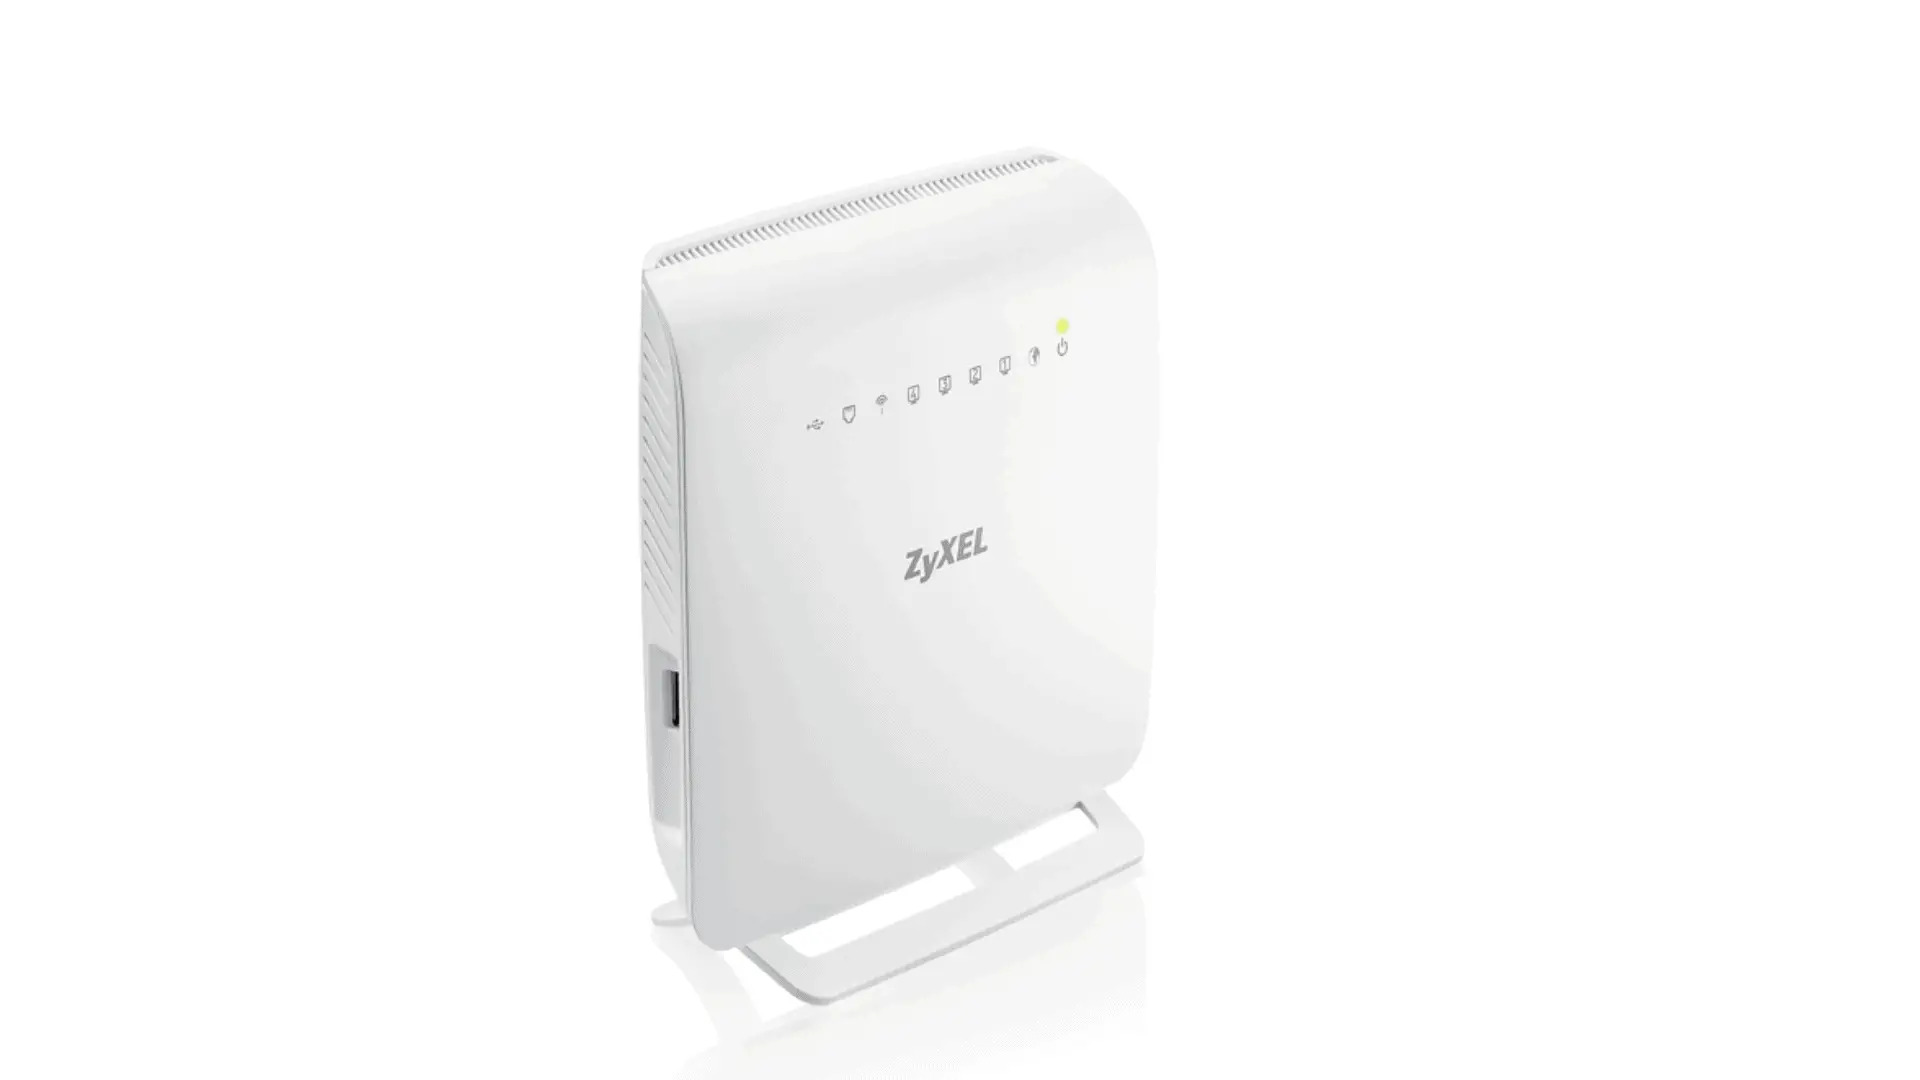 Here's How to Login to the ZyXEL VMG1312-B10B Router